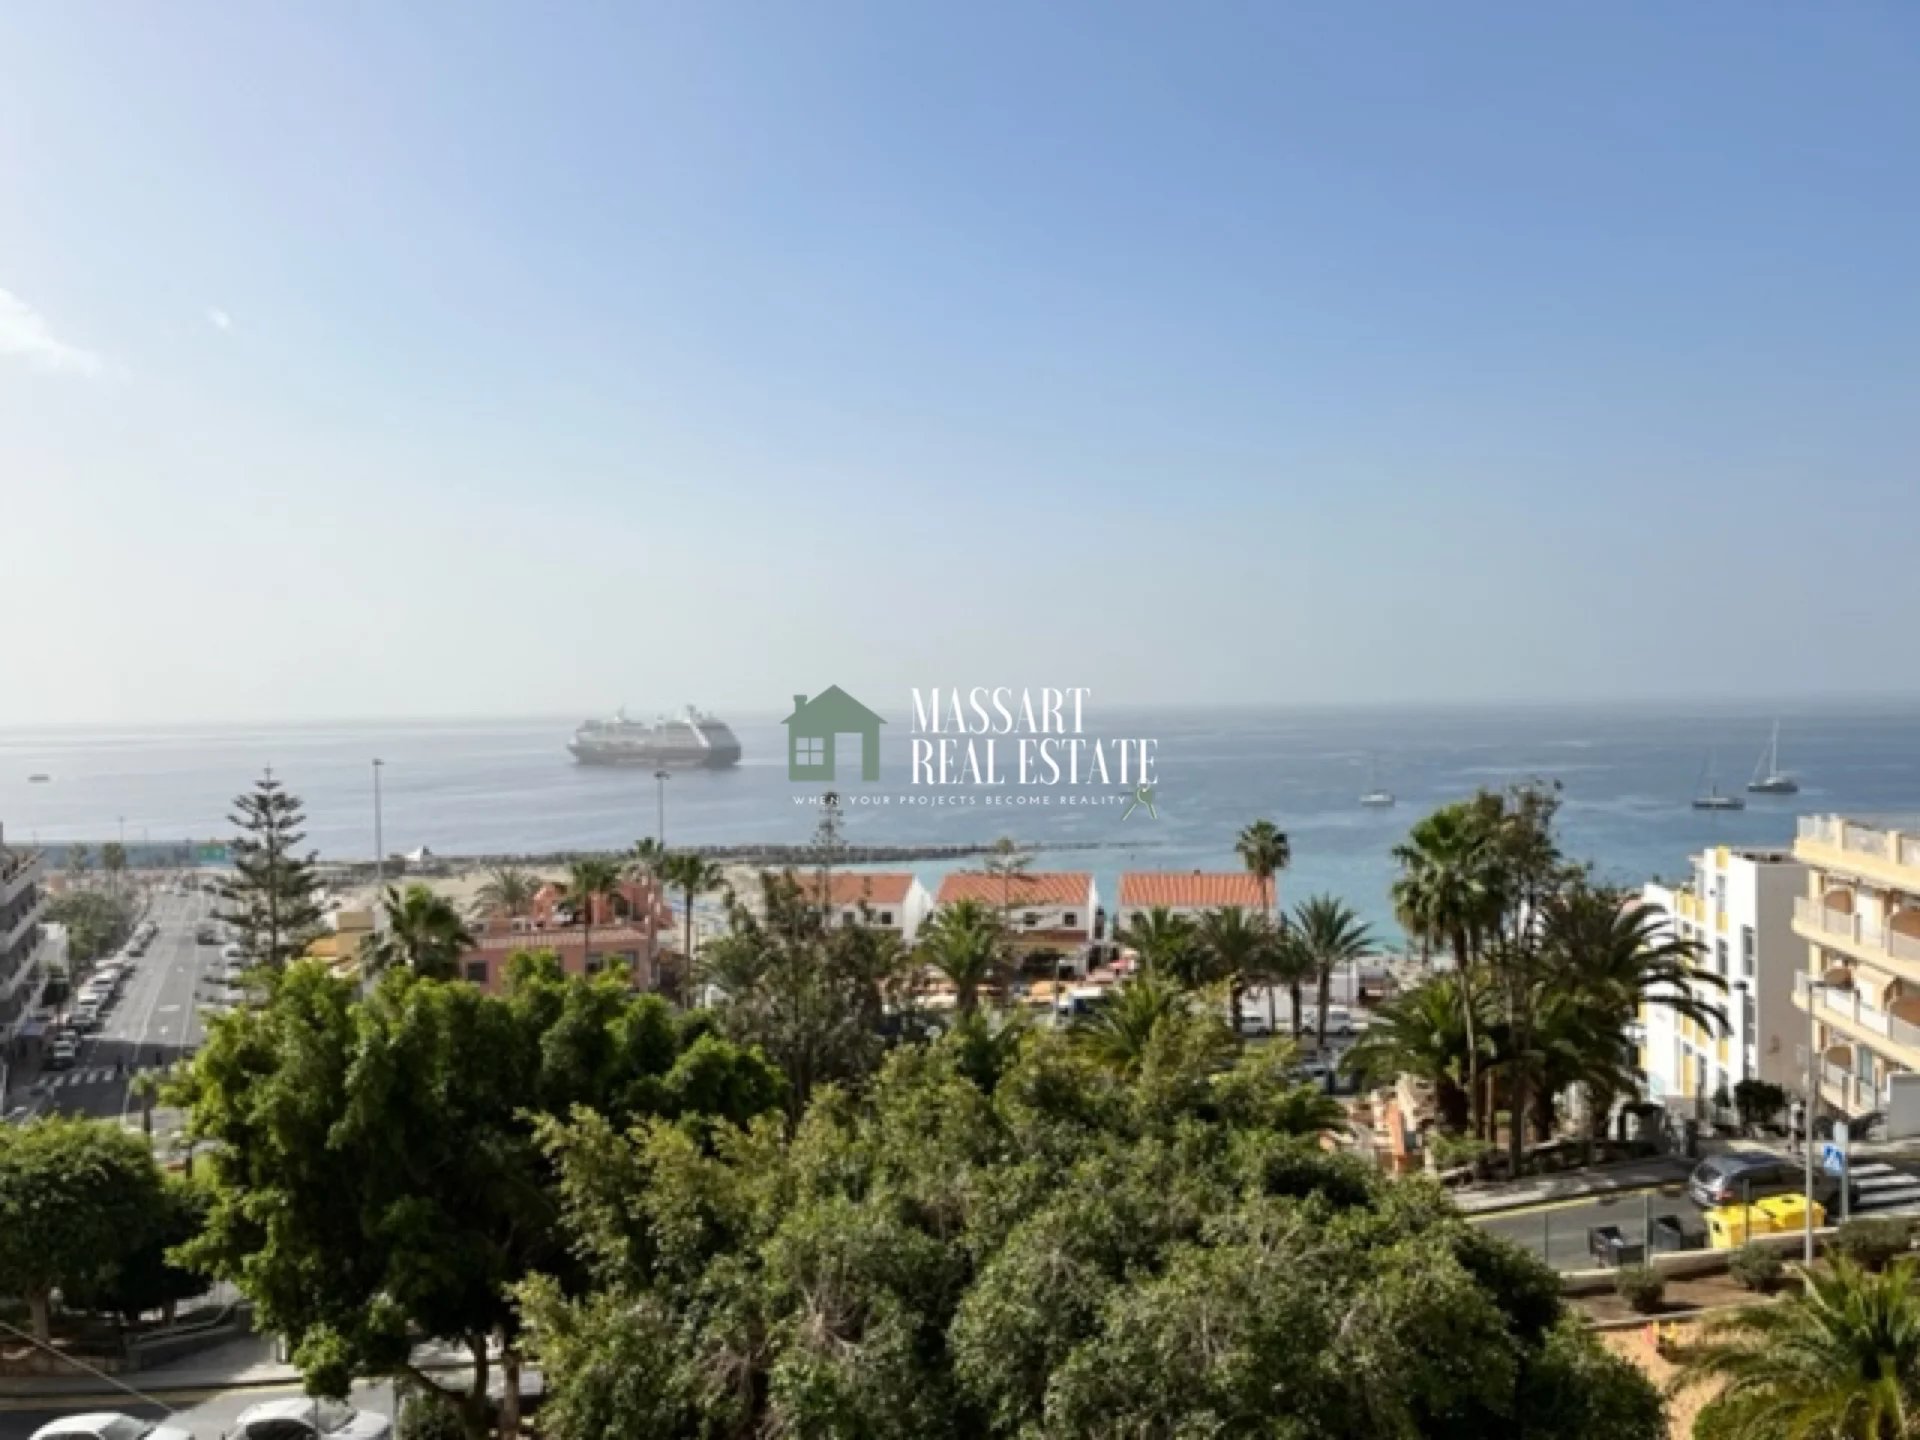 Building distributed over 3 floors of about 115-120 m2 each... very close to the popular area of ​​San Telmo, in Los Cristianos.